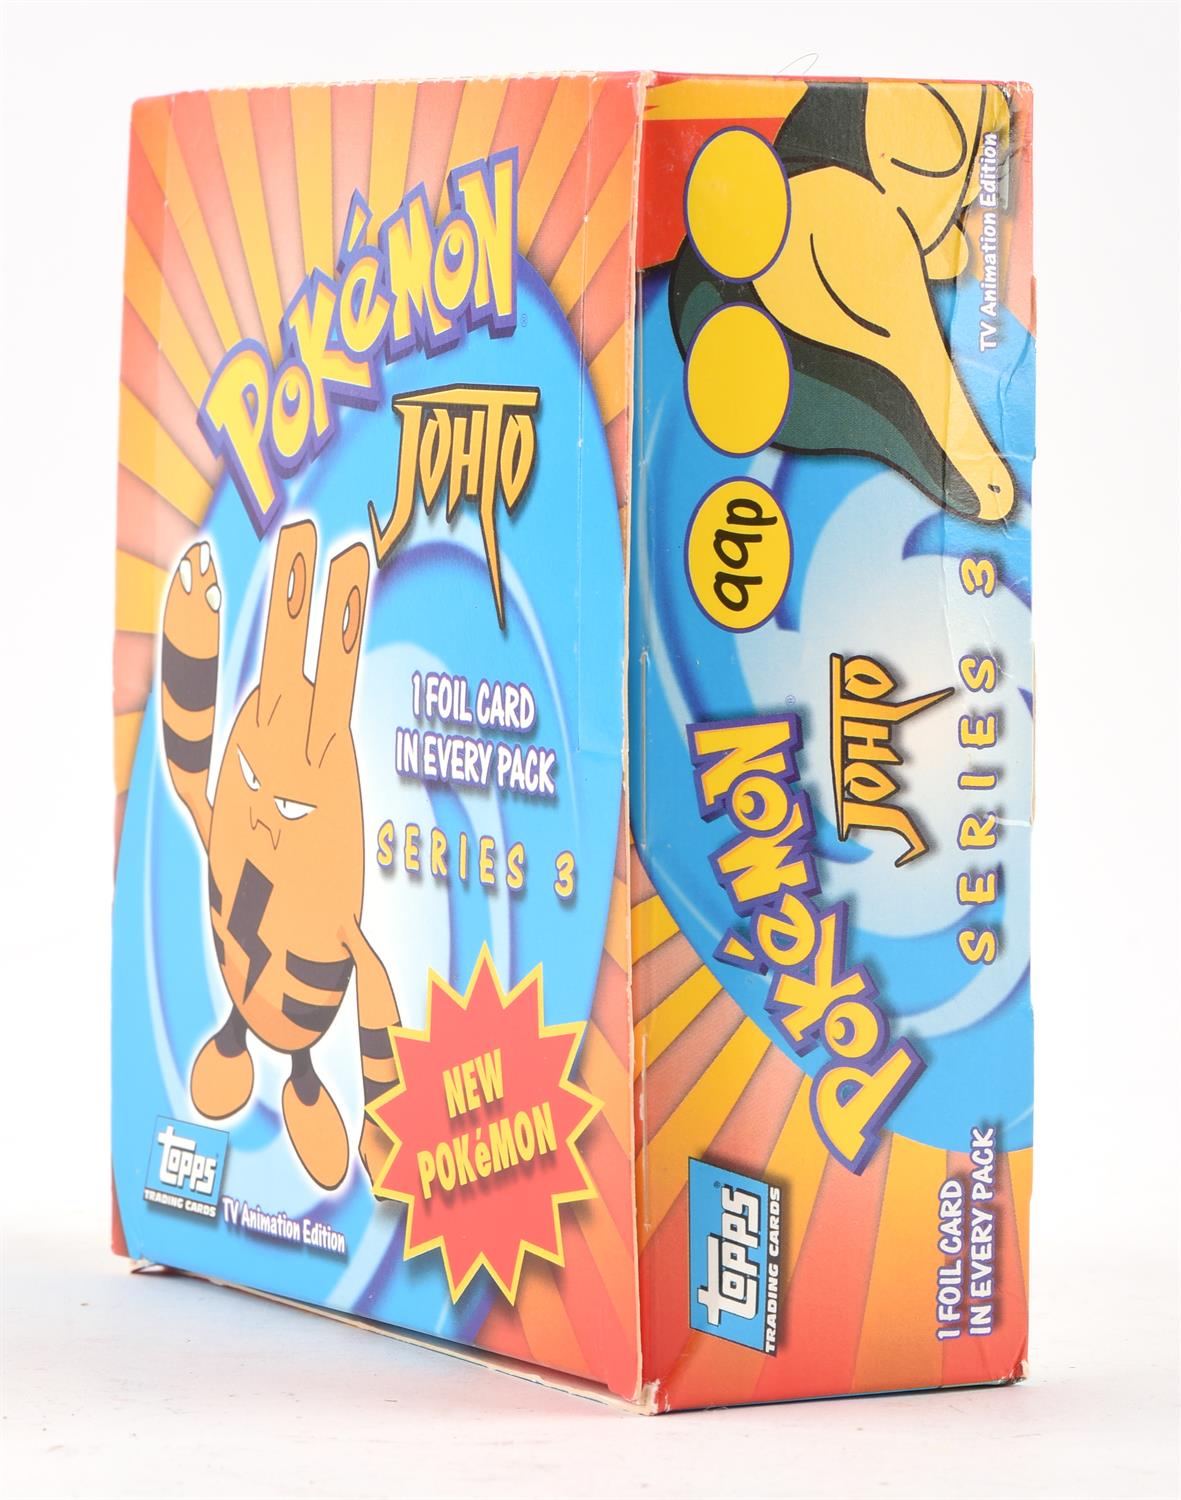 Pokemon TCG. Topps Johto series 3 opened booster box containing 24 sealed packs. Provenance: The - Image 6 of 9